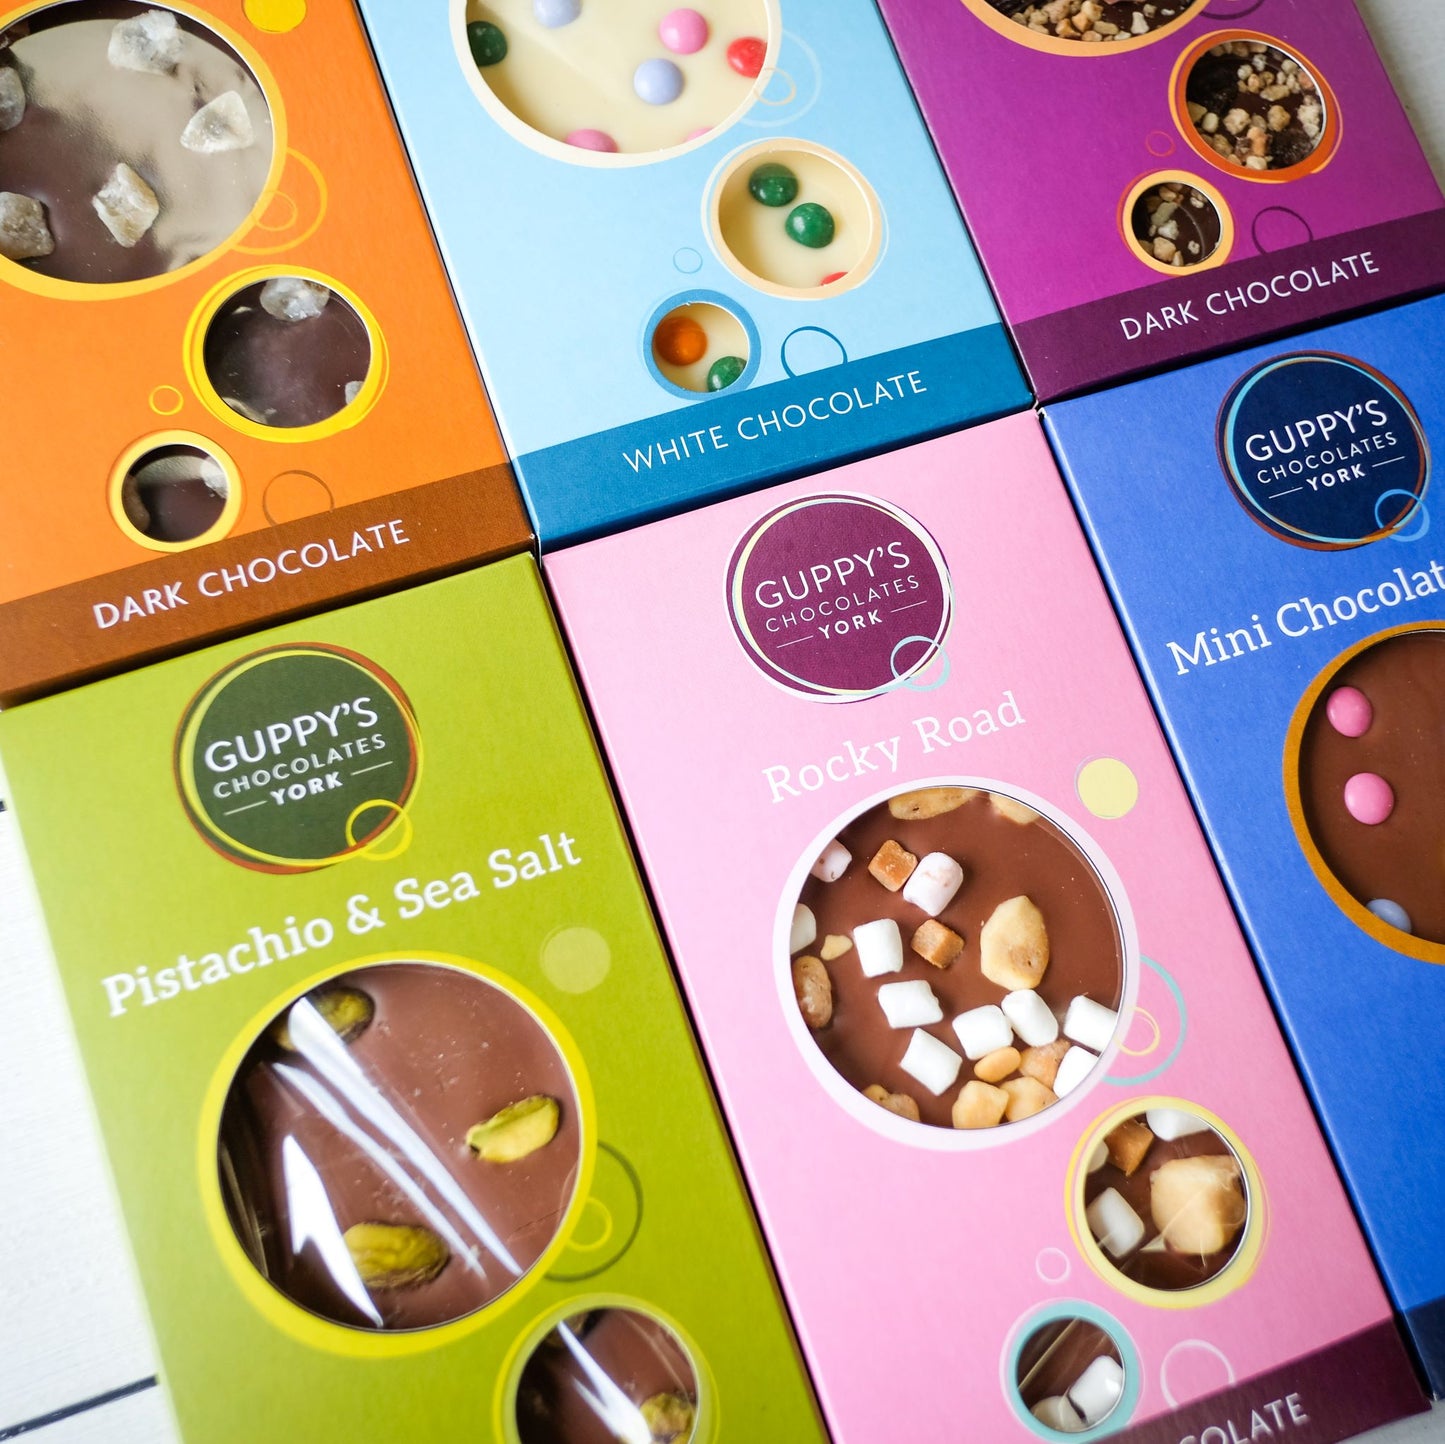 Our Range of Chocolate Bars